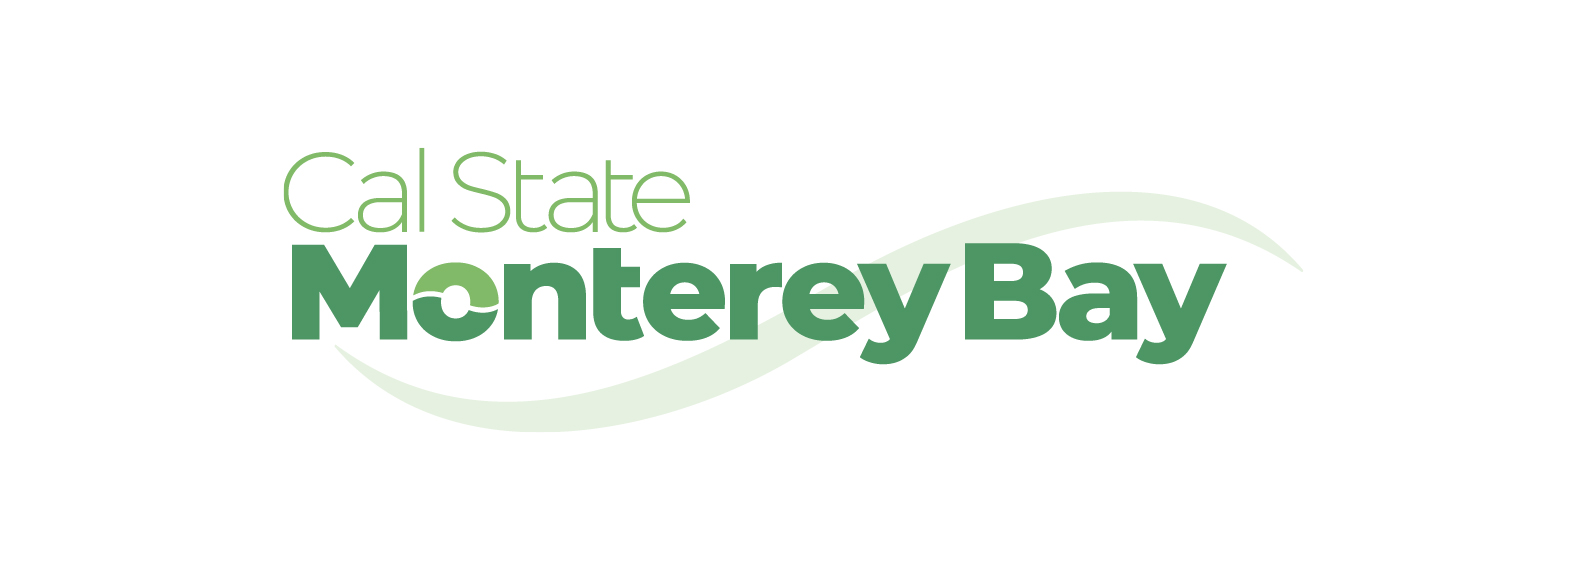 Cal State Monterey Bay Logo in green color